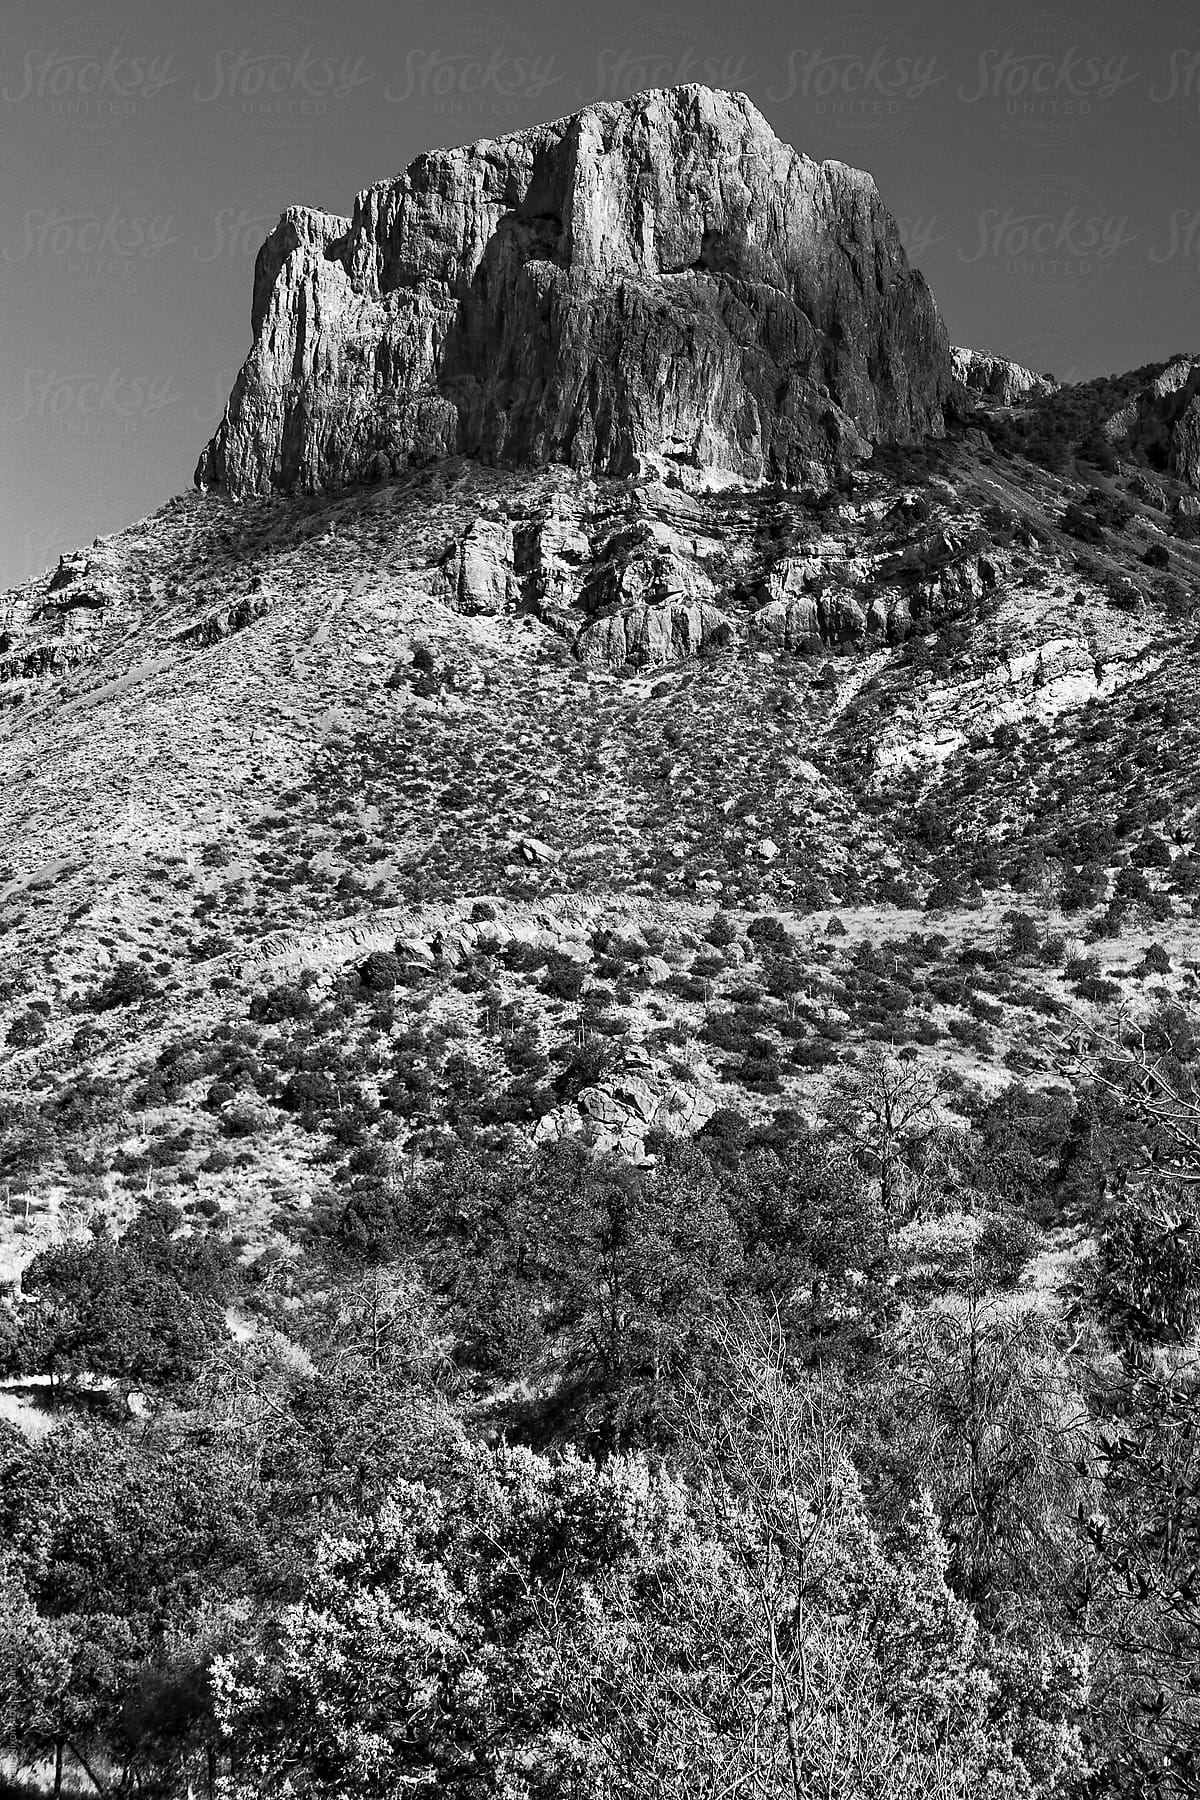 Mountain landscape in Big Bend National Park, Texas